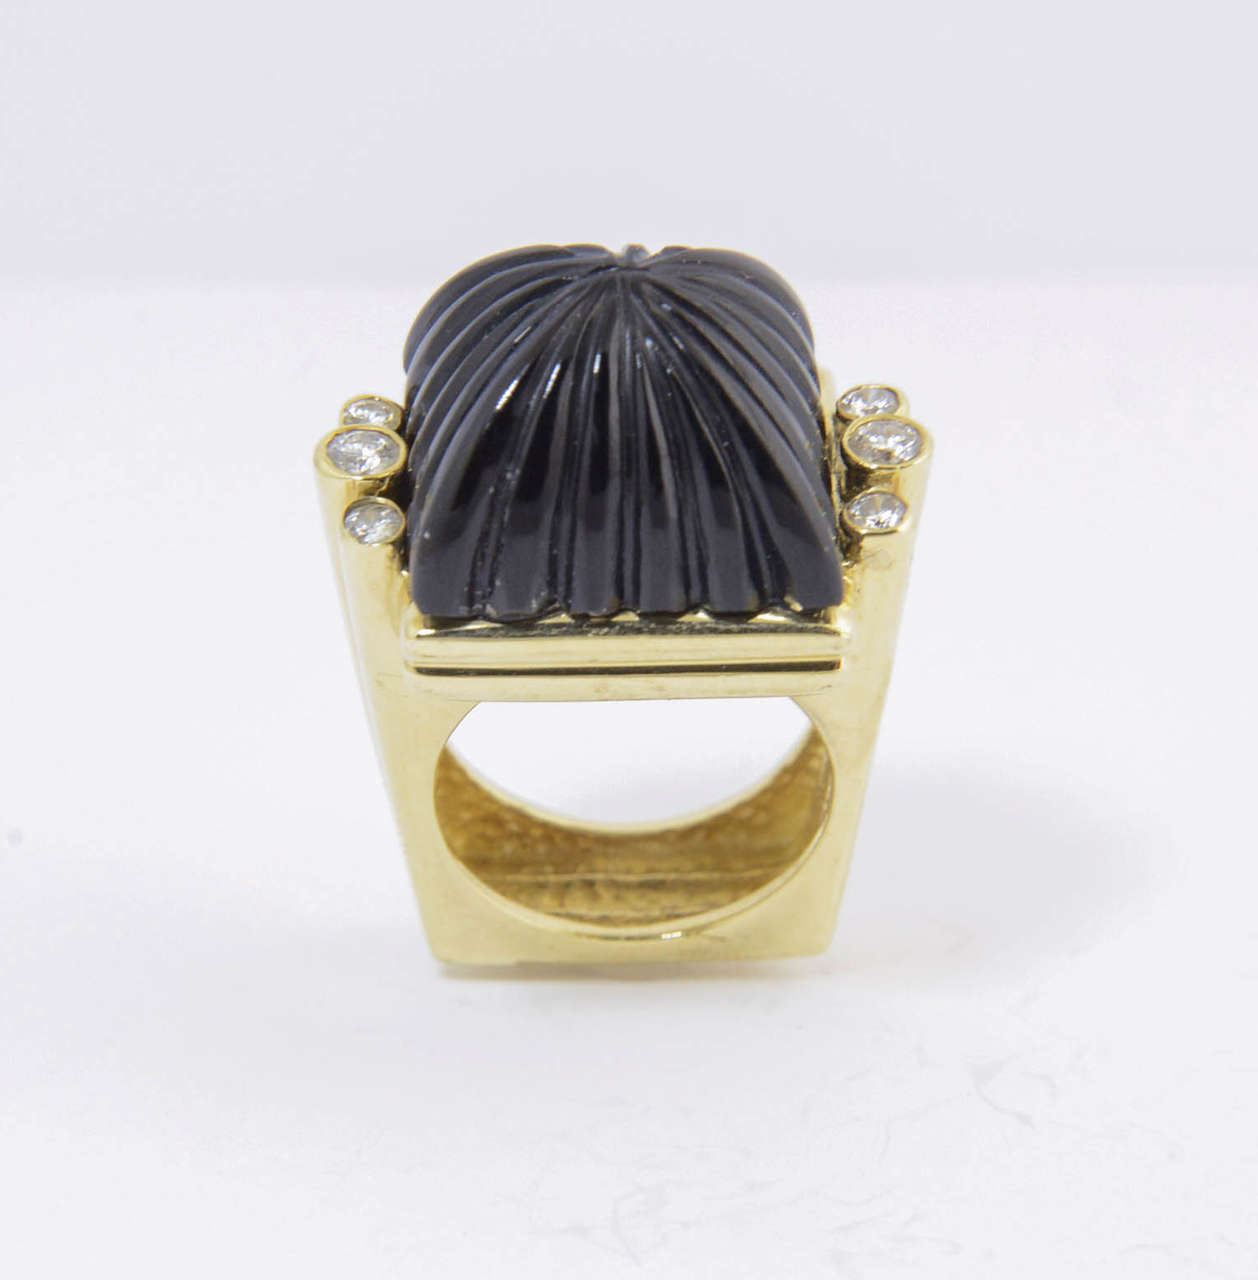 The design of this ring is great.  It is 18k yellow gold with a carved onyx dome center with 3 diamonds on either side.

US size 6.5